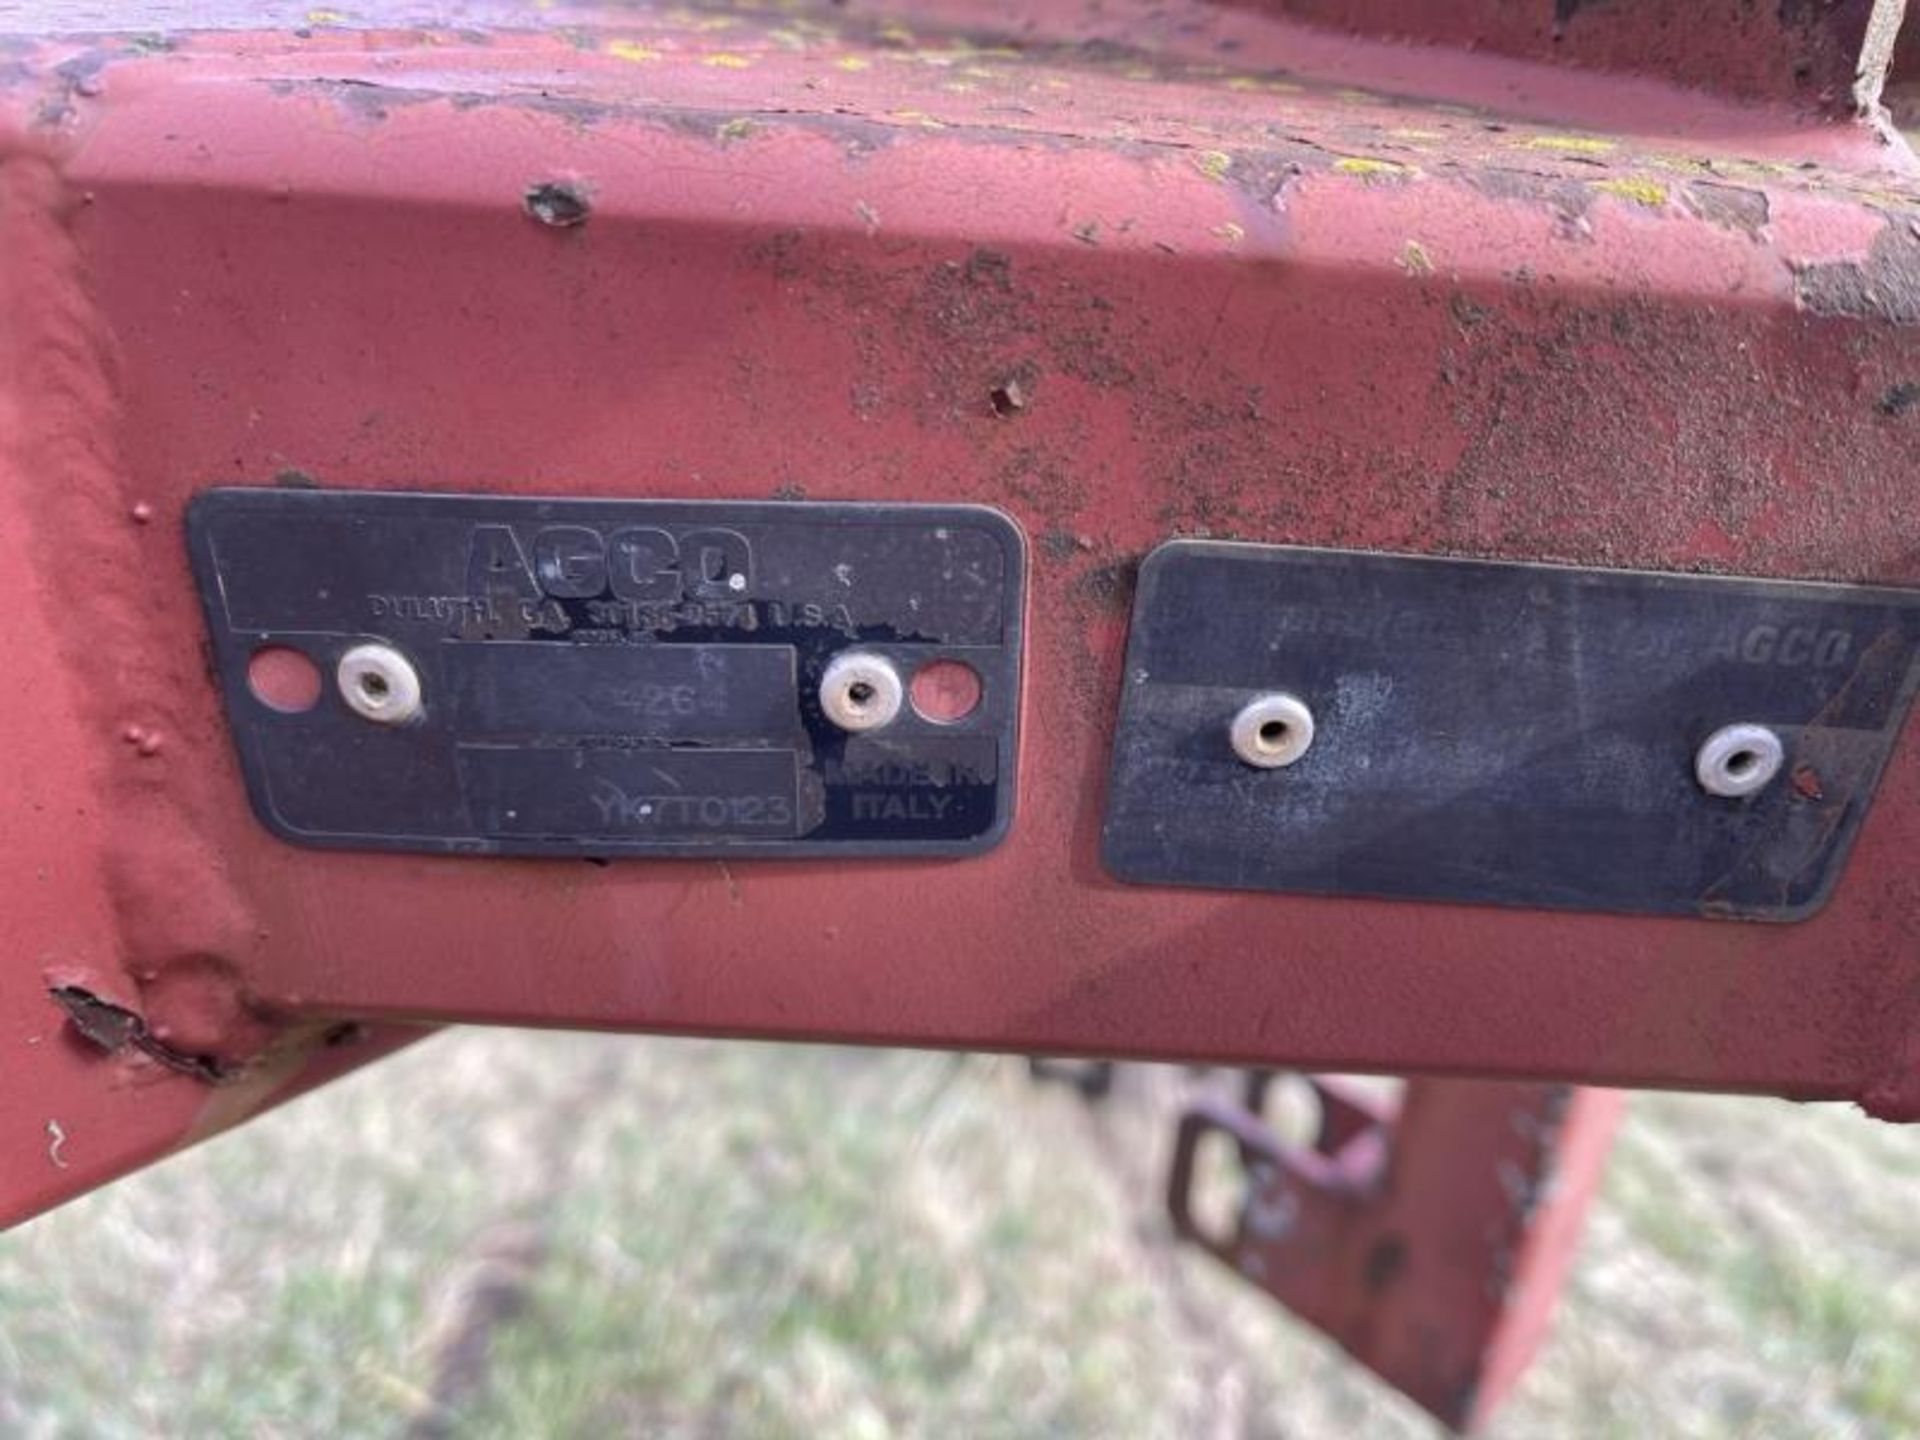 New Idea Rake Tedder, 3 Point Hitch PTO in 2 PartsParts - Image 7 of 7